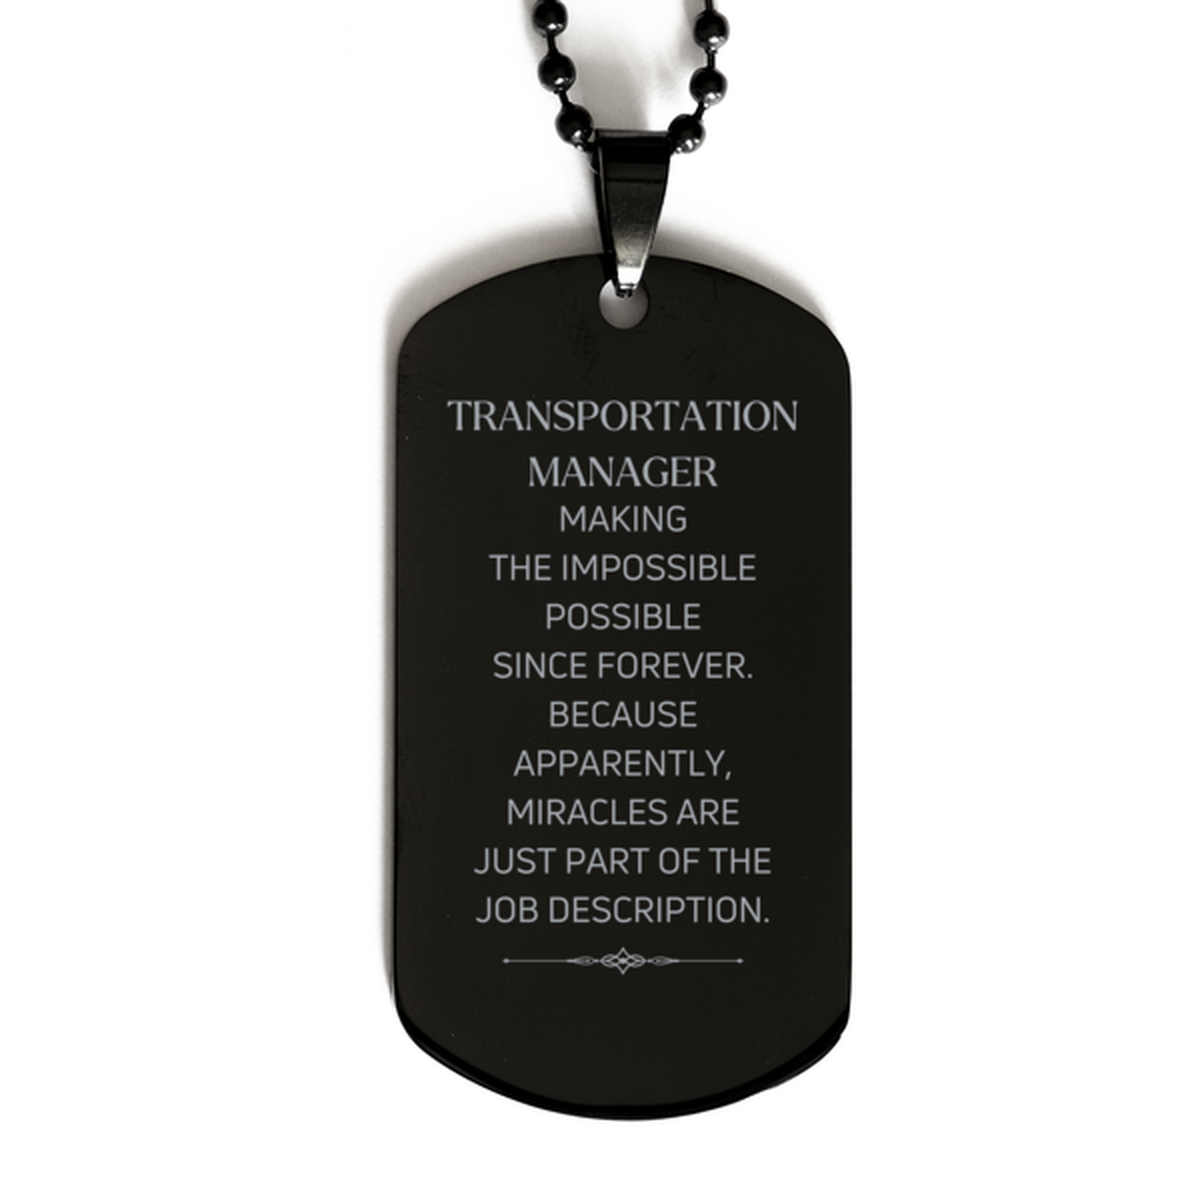 Funny Transportation Manager Gifts, Miracles are just part of the job description, Inspirational Birthday Black Dog Tag For Transportation Manager, Men, Women, Coworkers, Friends, Boss